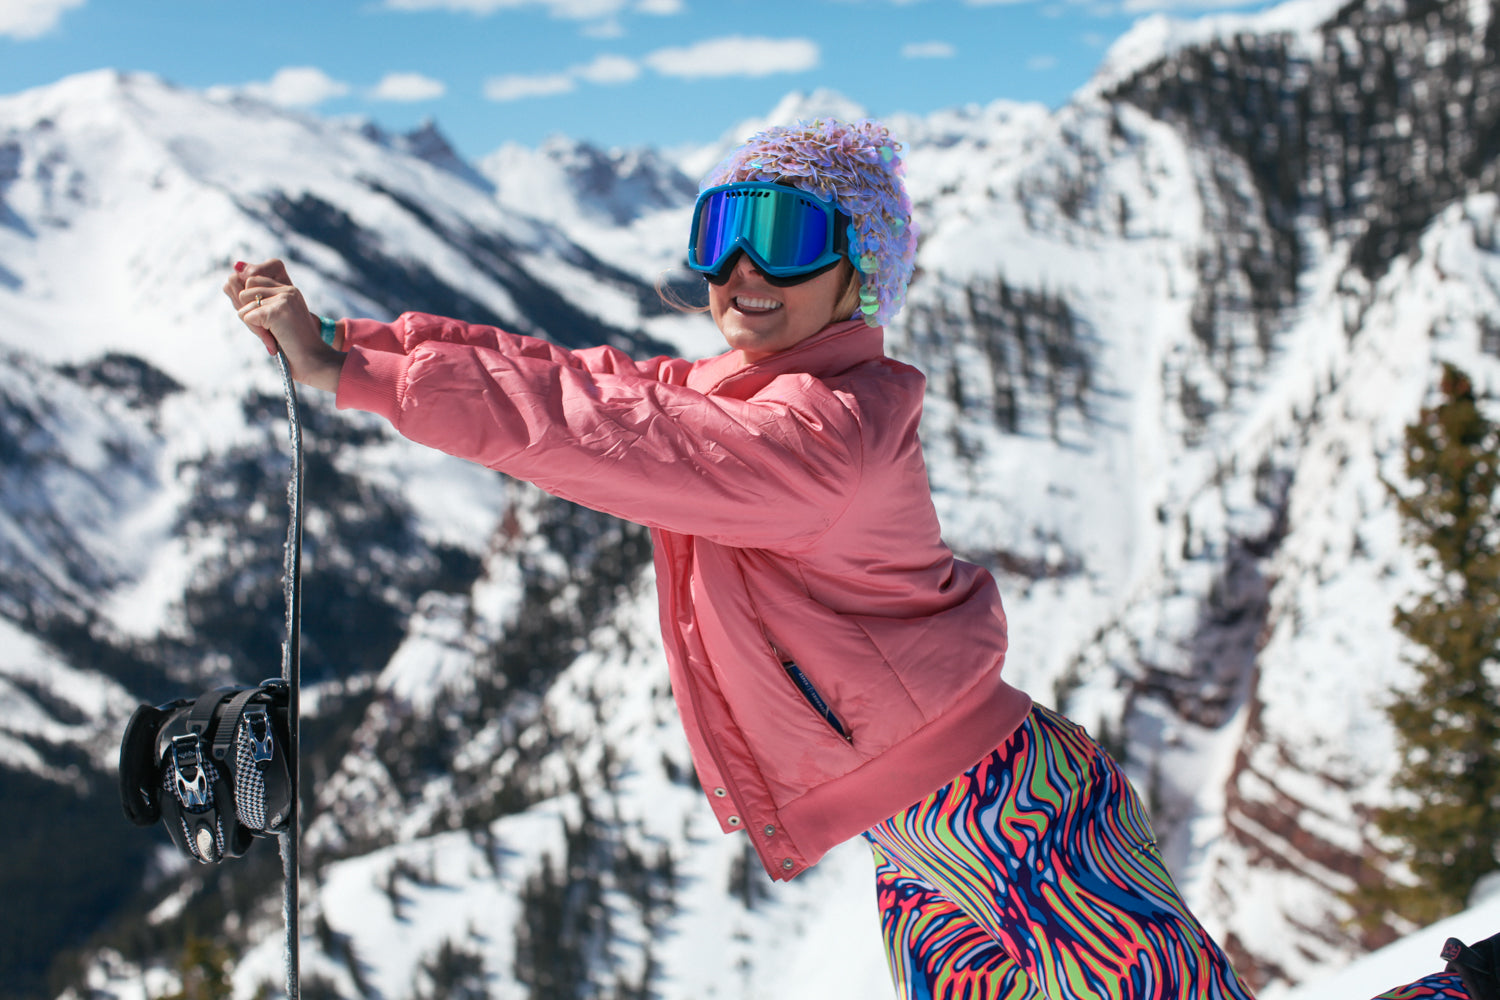 The Racysuits Guide To The Top 10 Après Ski Events this Spring